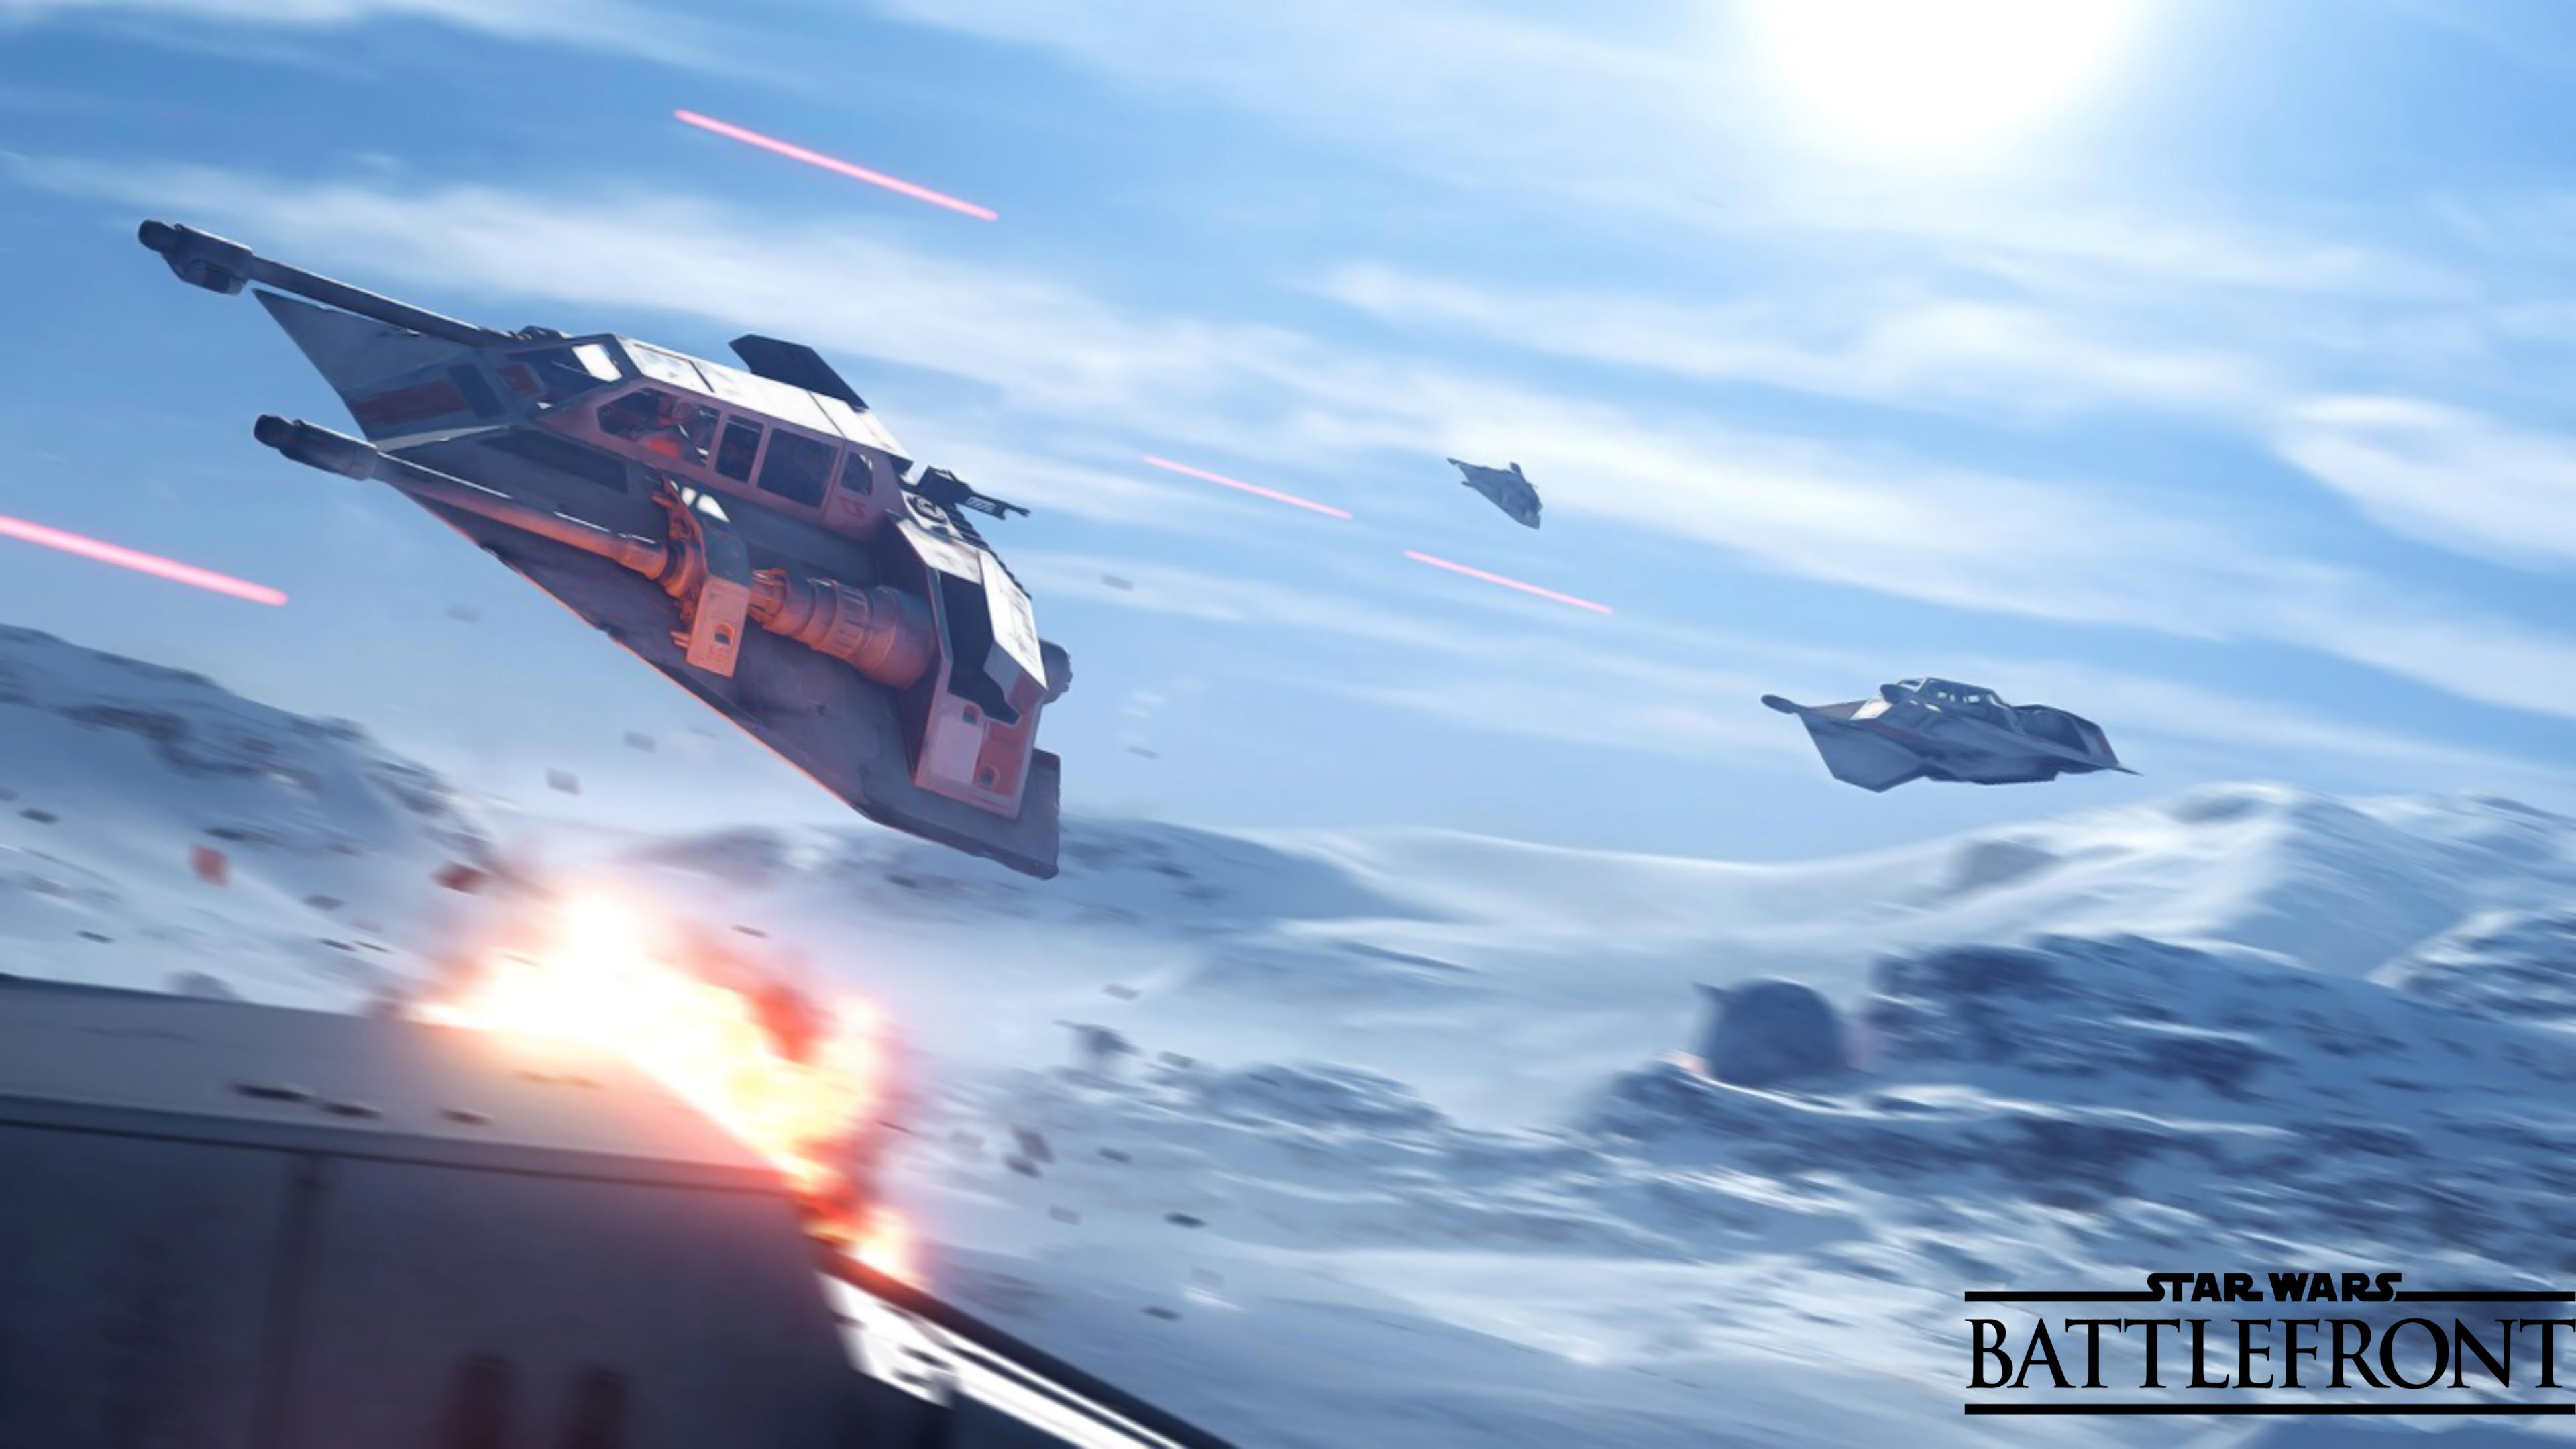 battlefront wallpaper,vehicle,helicopter,aircraft,pc game,rotorcraft